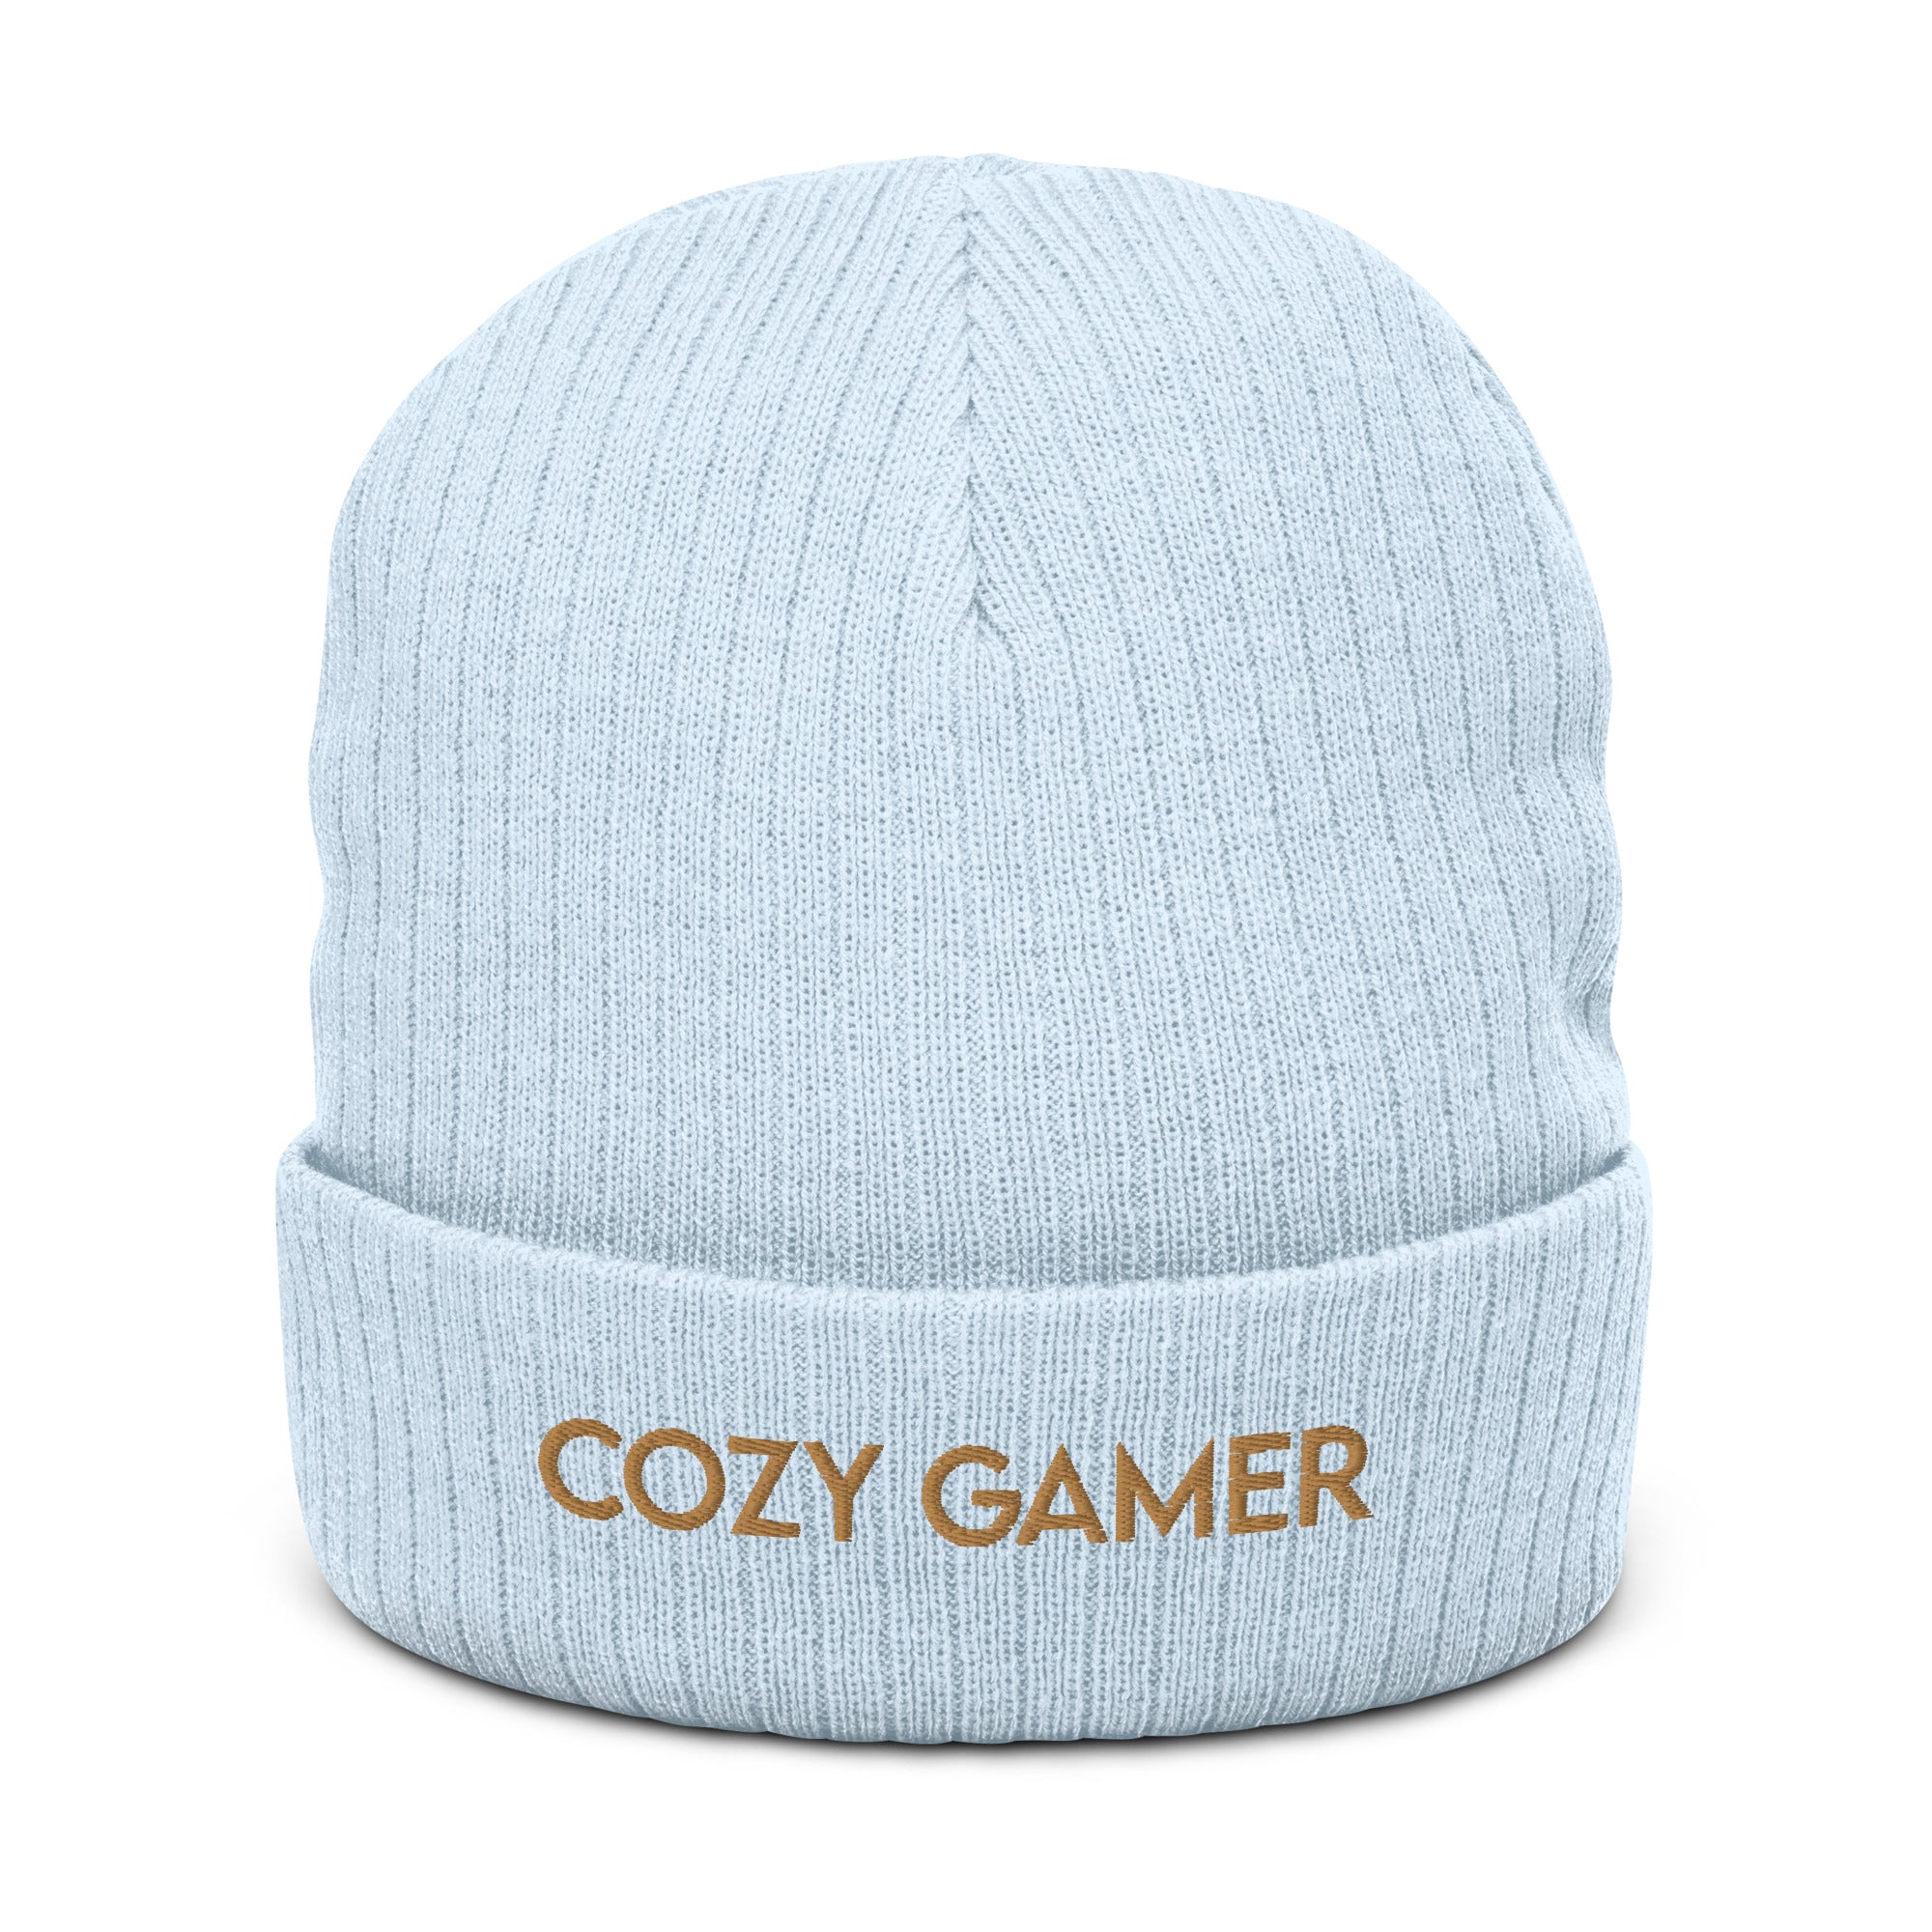 Cozy Gamer | Ribbed knit beanie Threads and Thistles Inventory Light Blue 